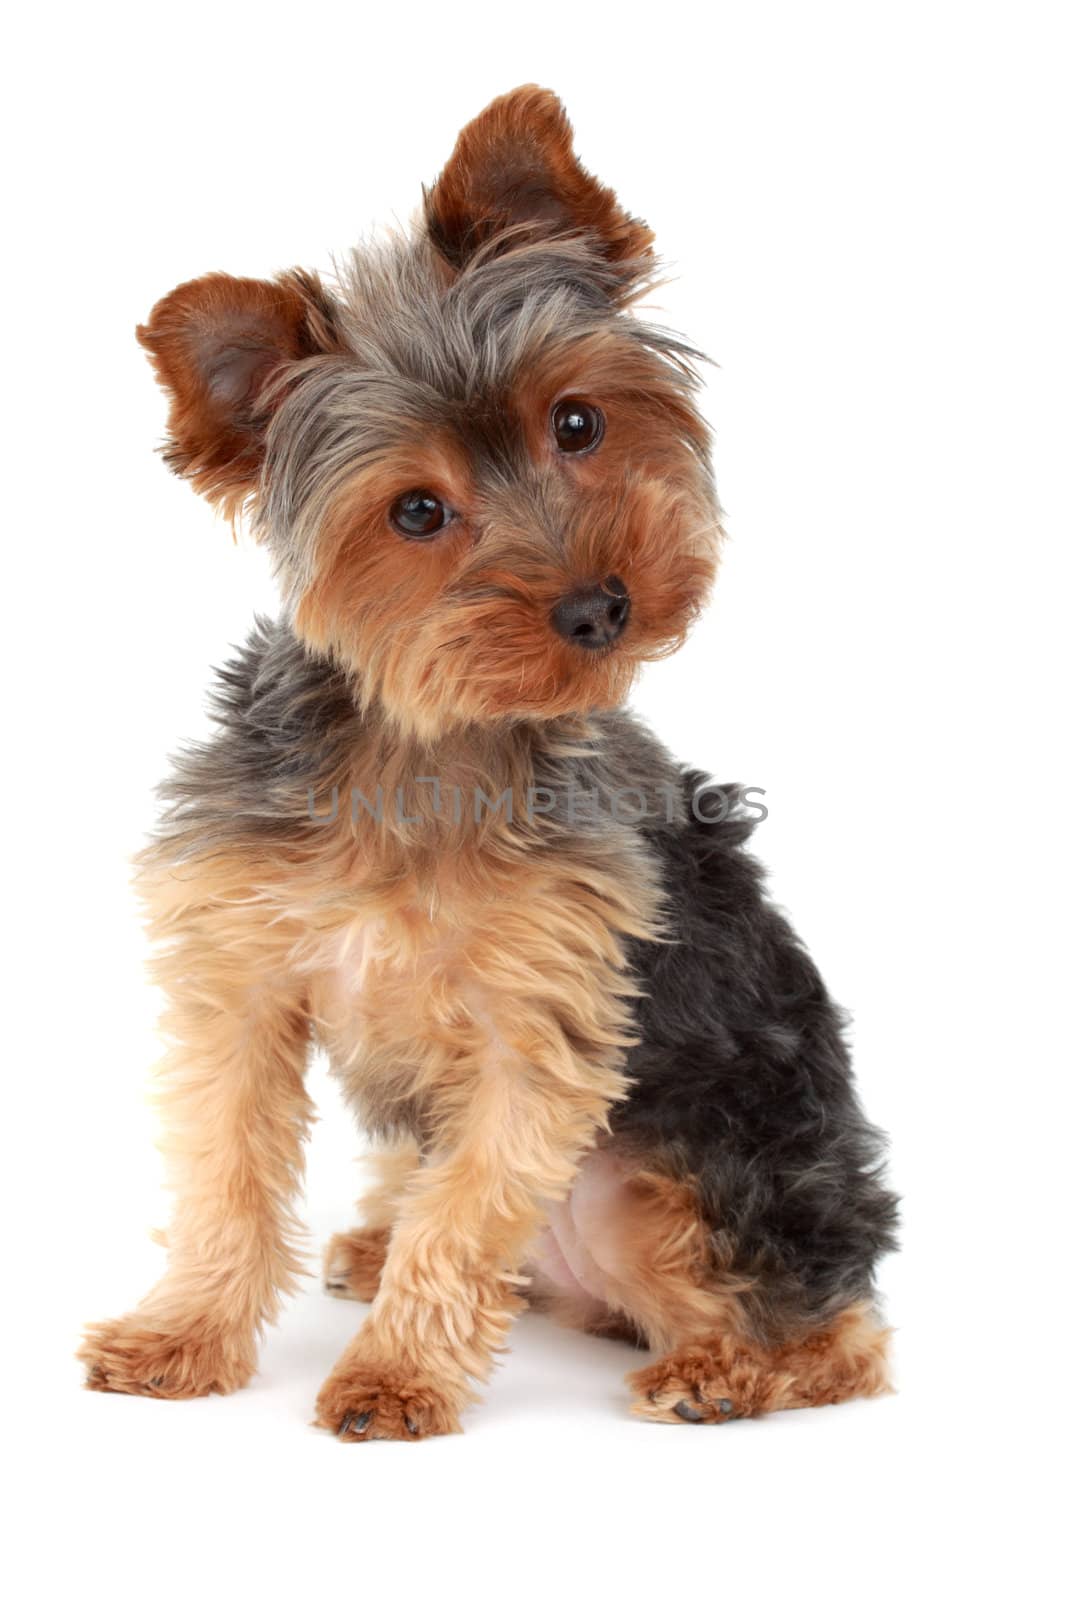 yorkshire terrier by lanalanglois